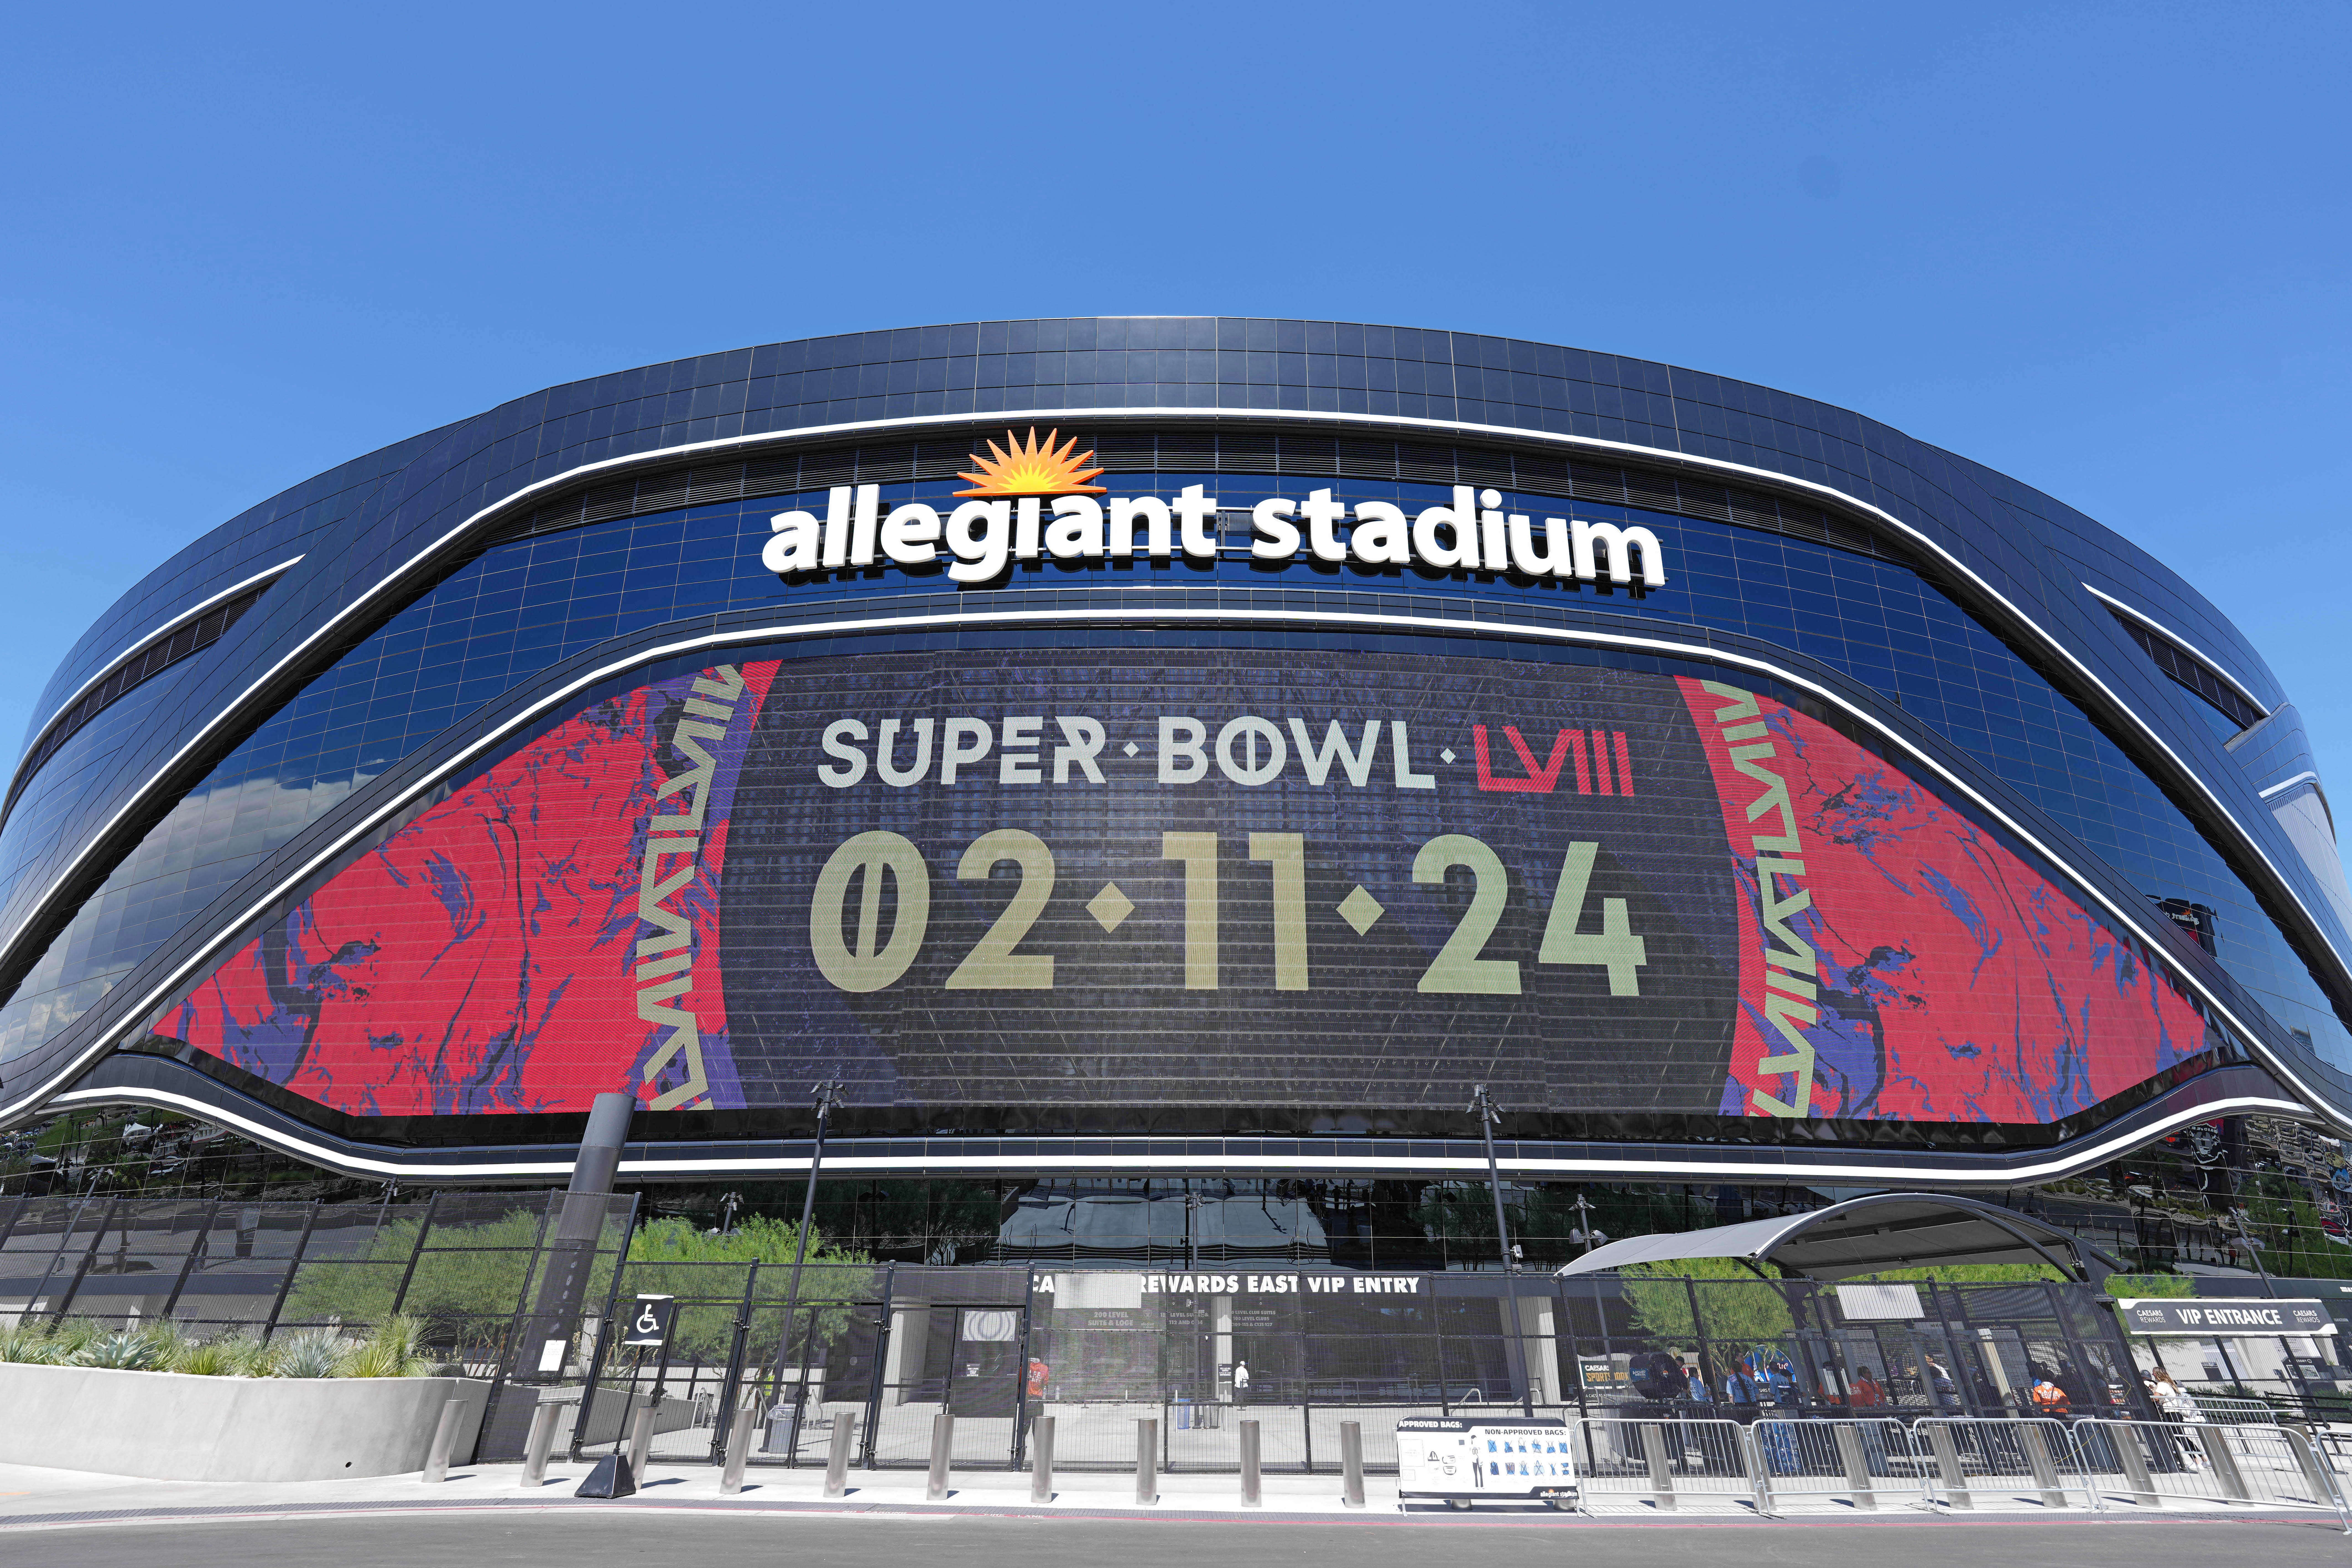 North Carolina Online Sports Betting Won’t Be Live By the Super Bowl